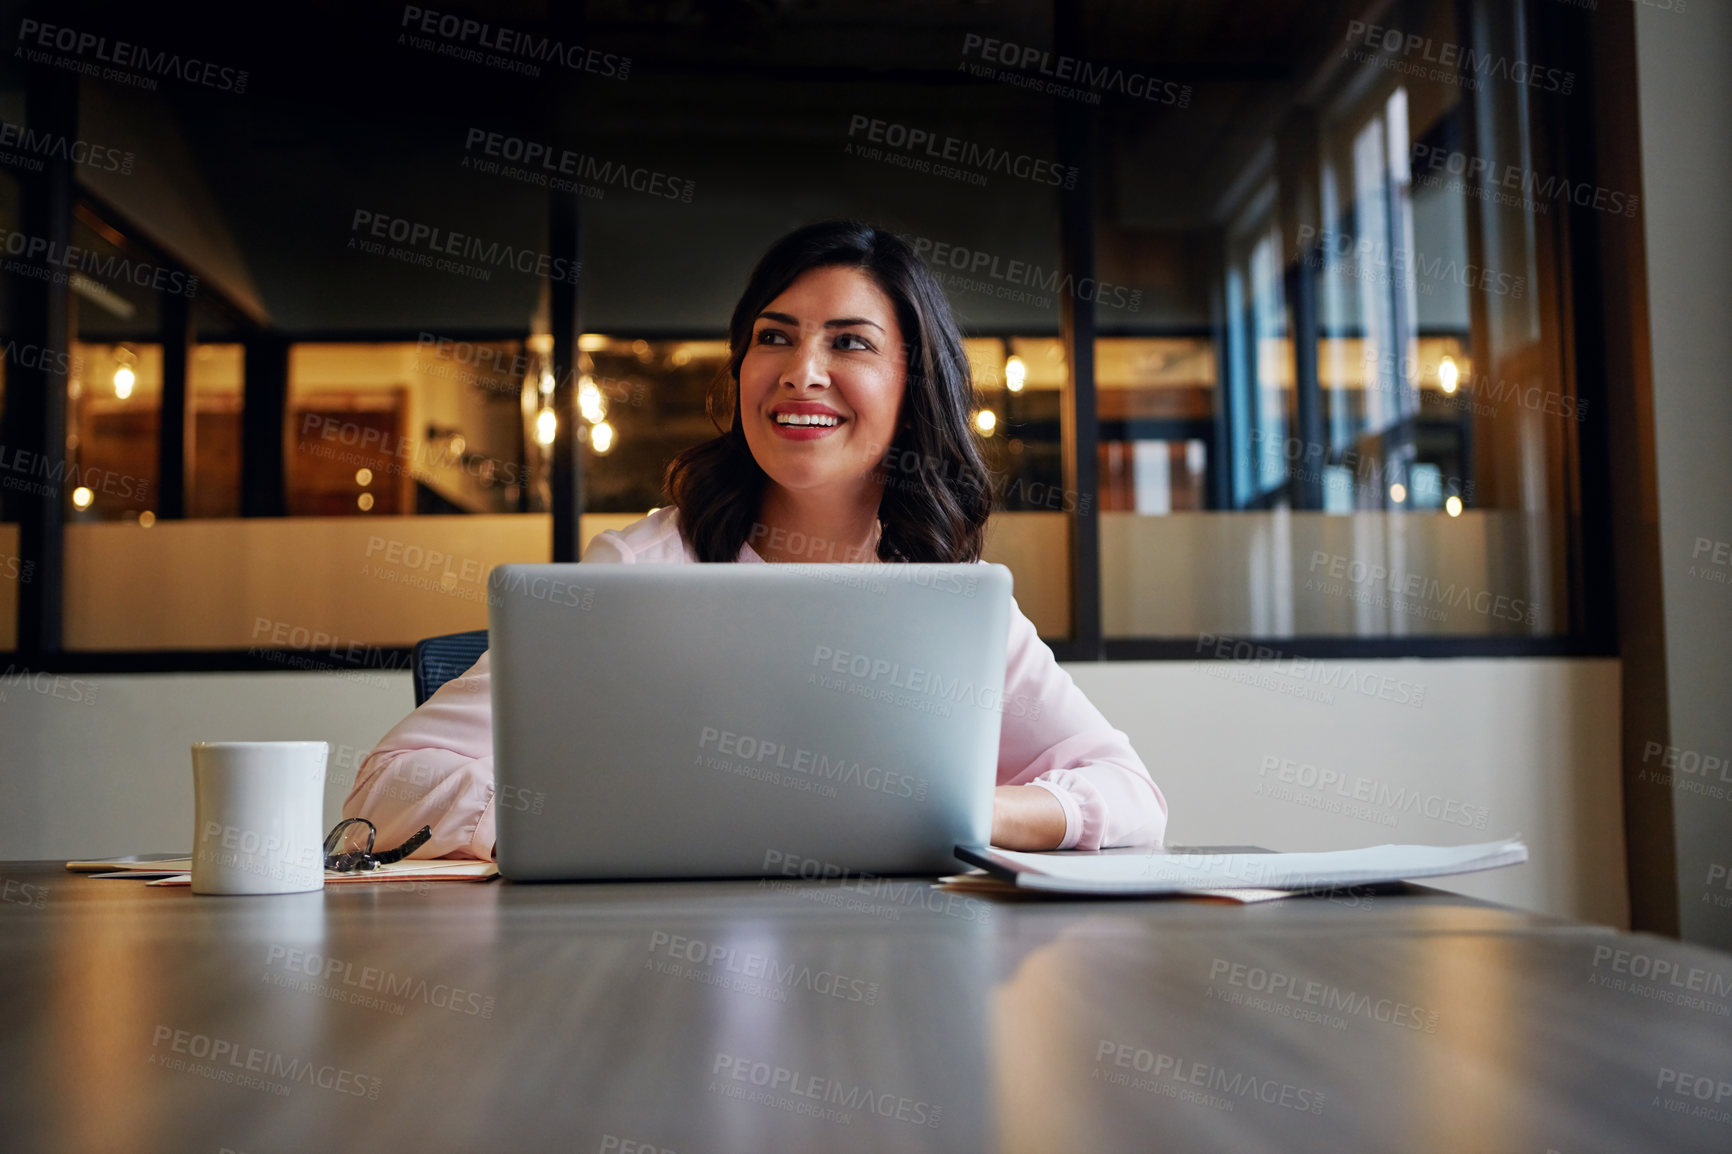 Buy stock photo Shot of a smiling businesswoman working on a laptop in an office